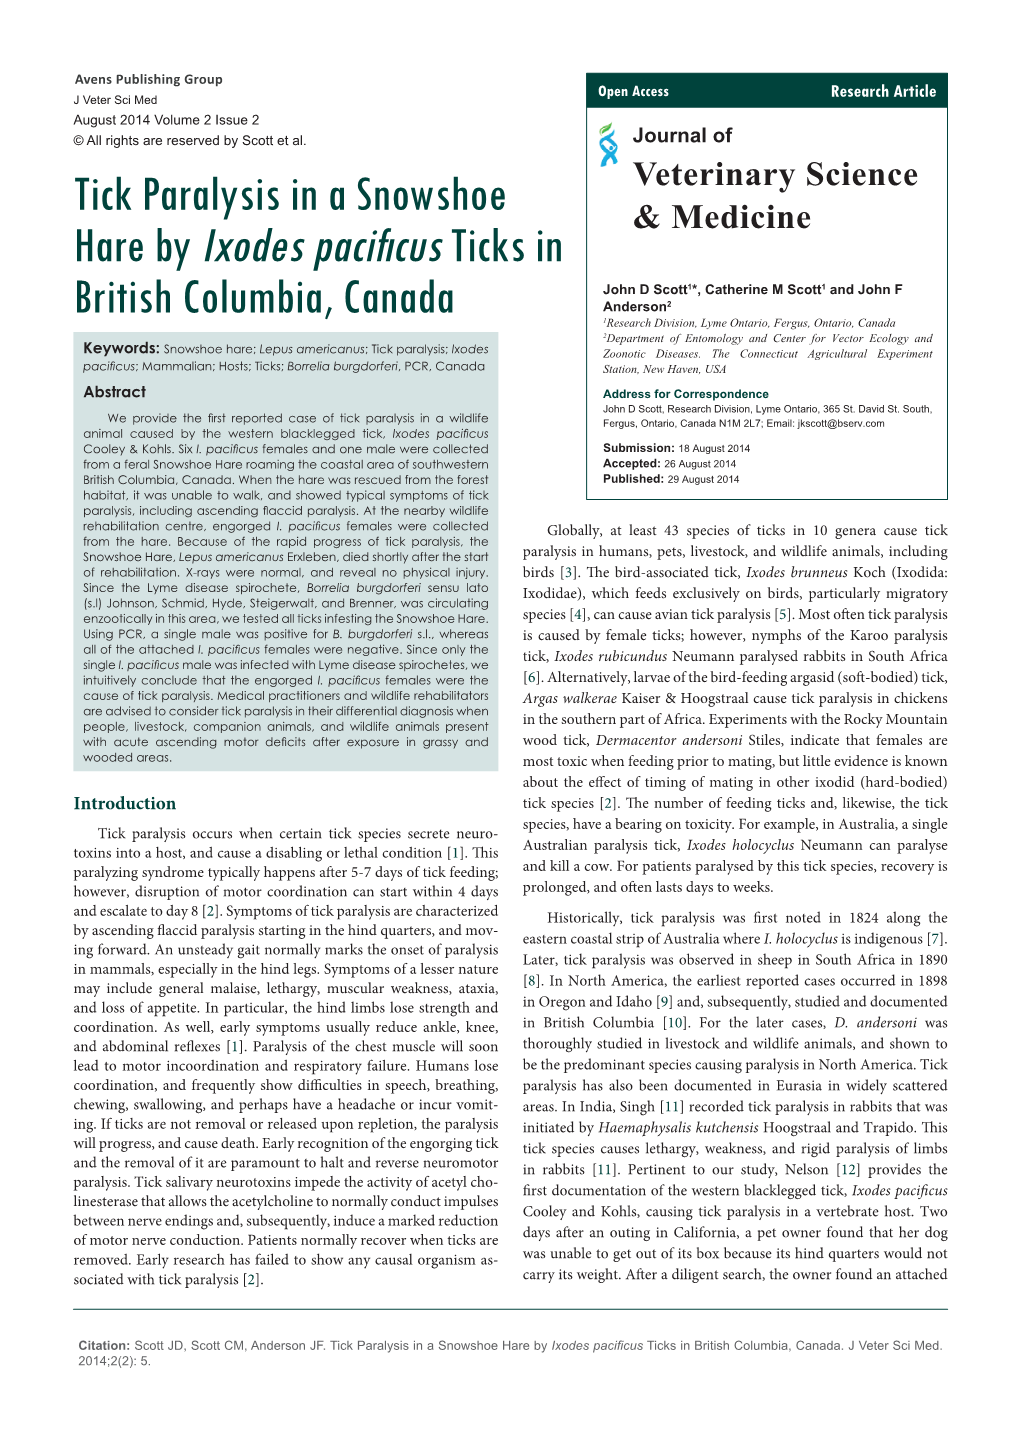 Tick Paralysis in a Snowshoe Hare by Ixodes Pacificus Ticks in British Columbia, Canada